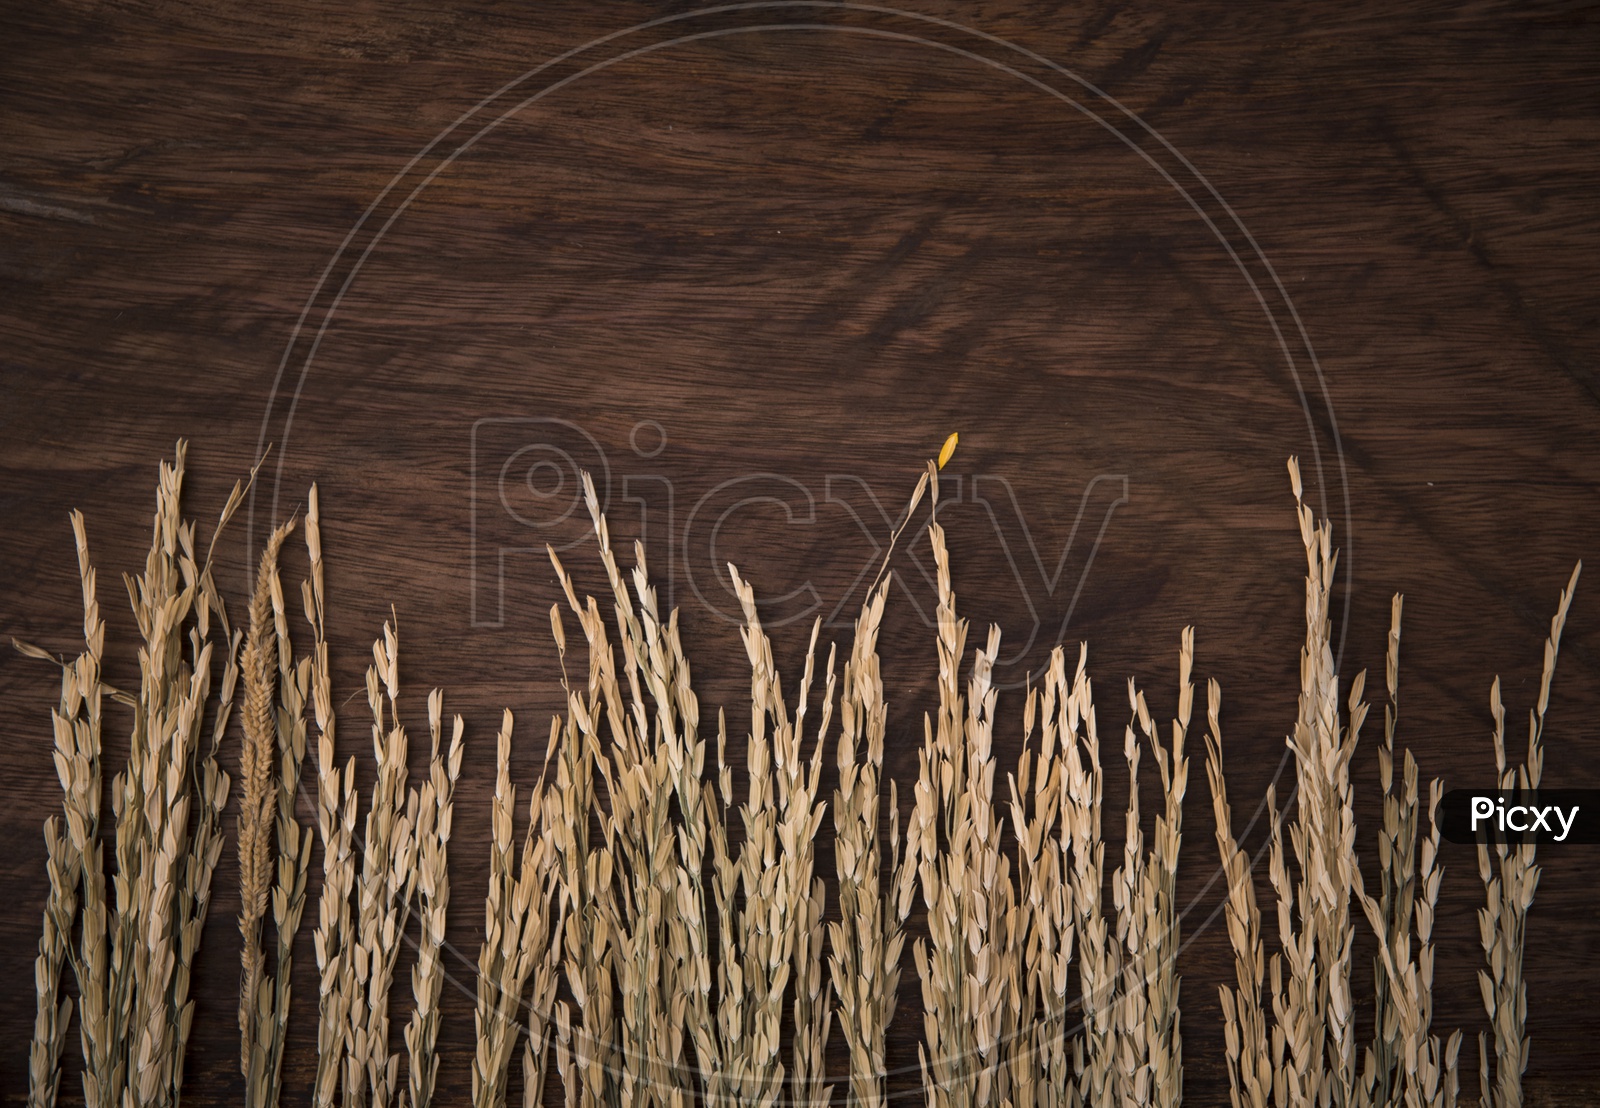 vintage texture background with grass and wooden board